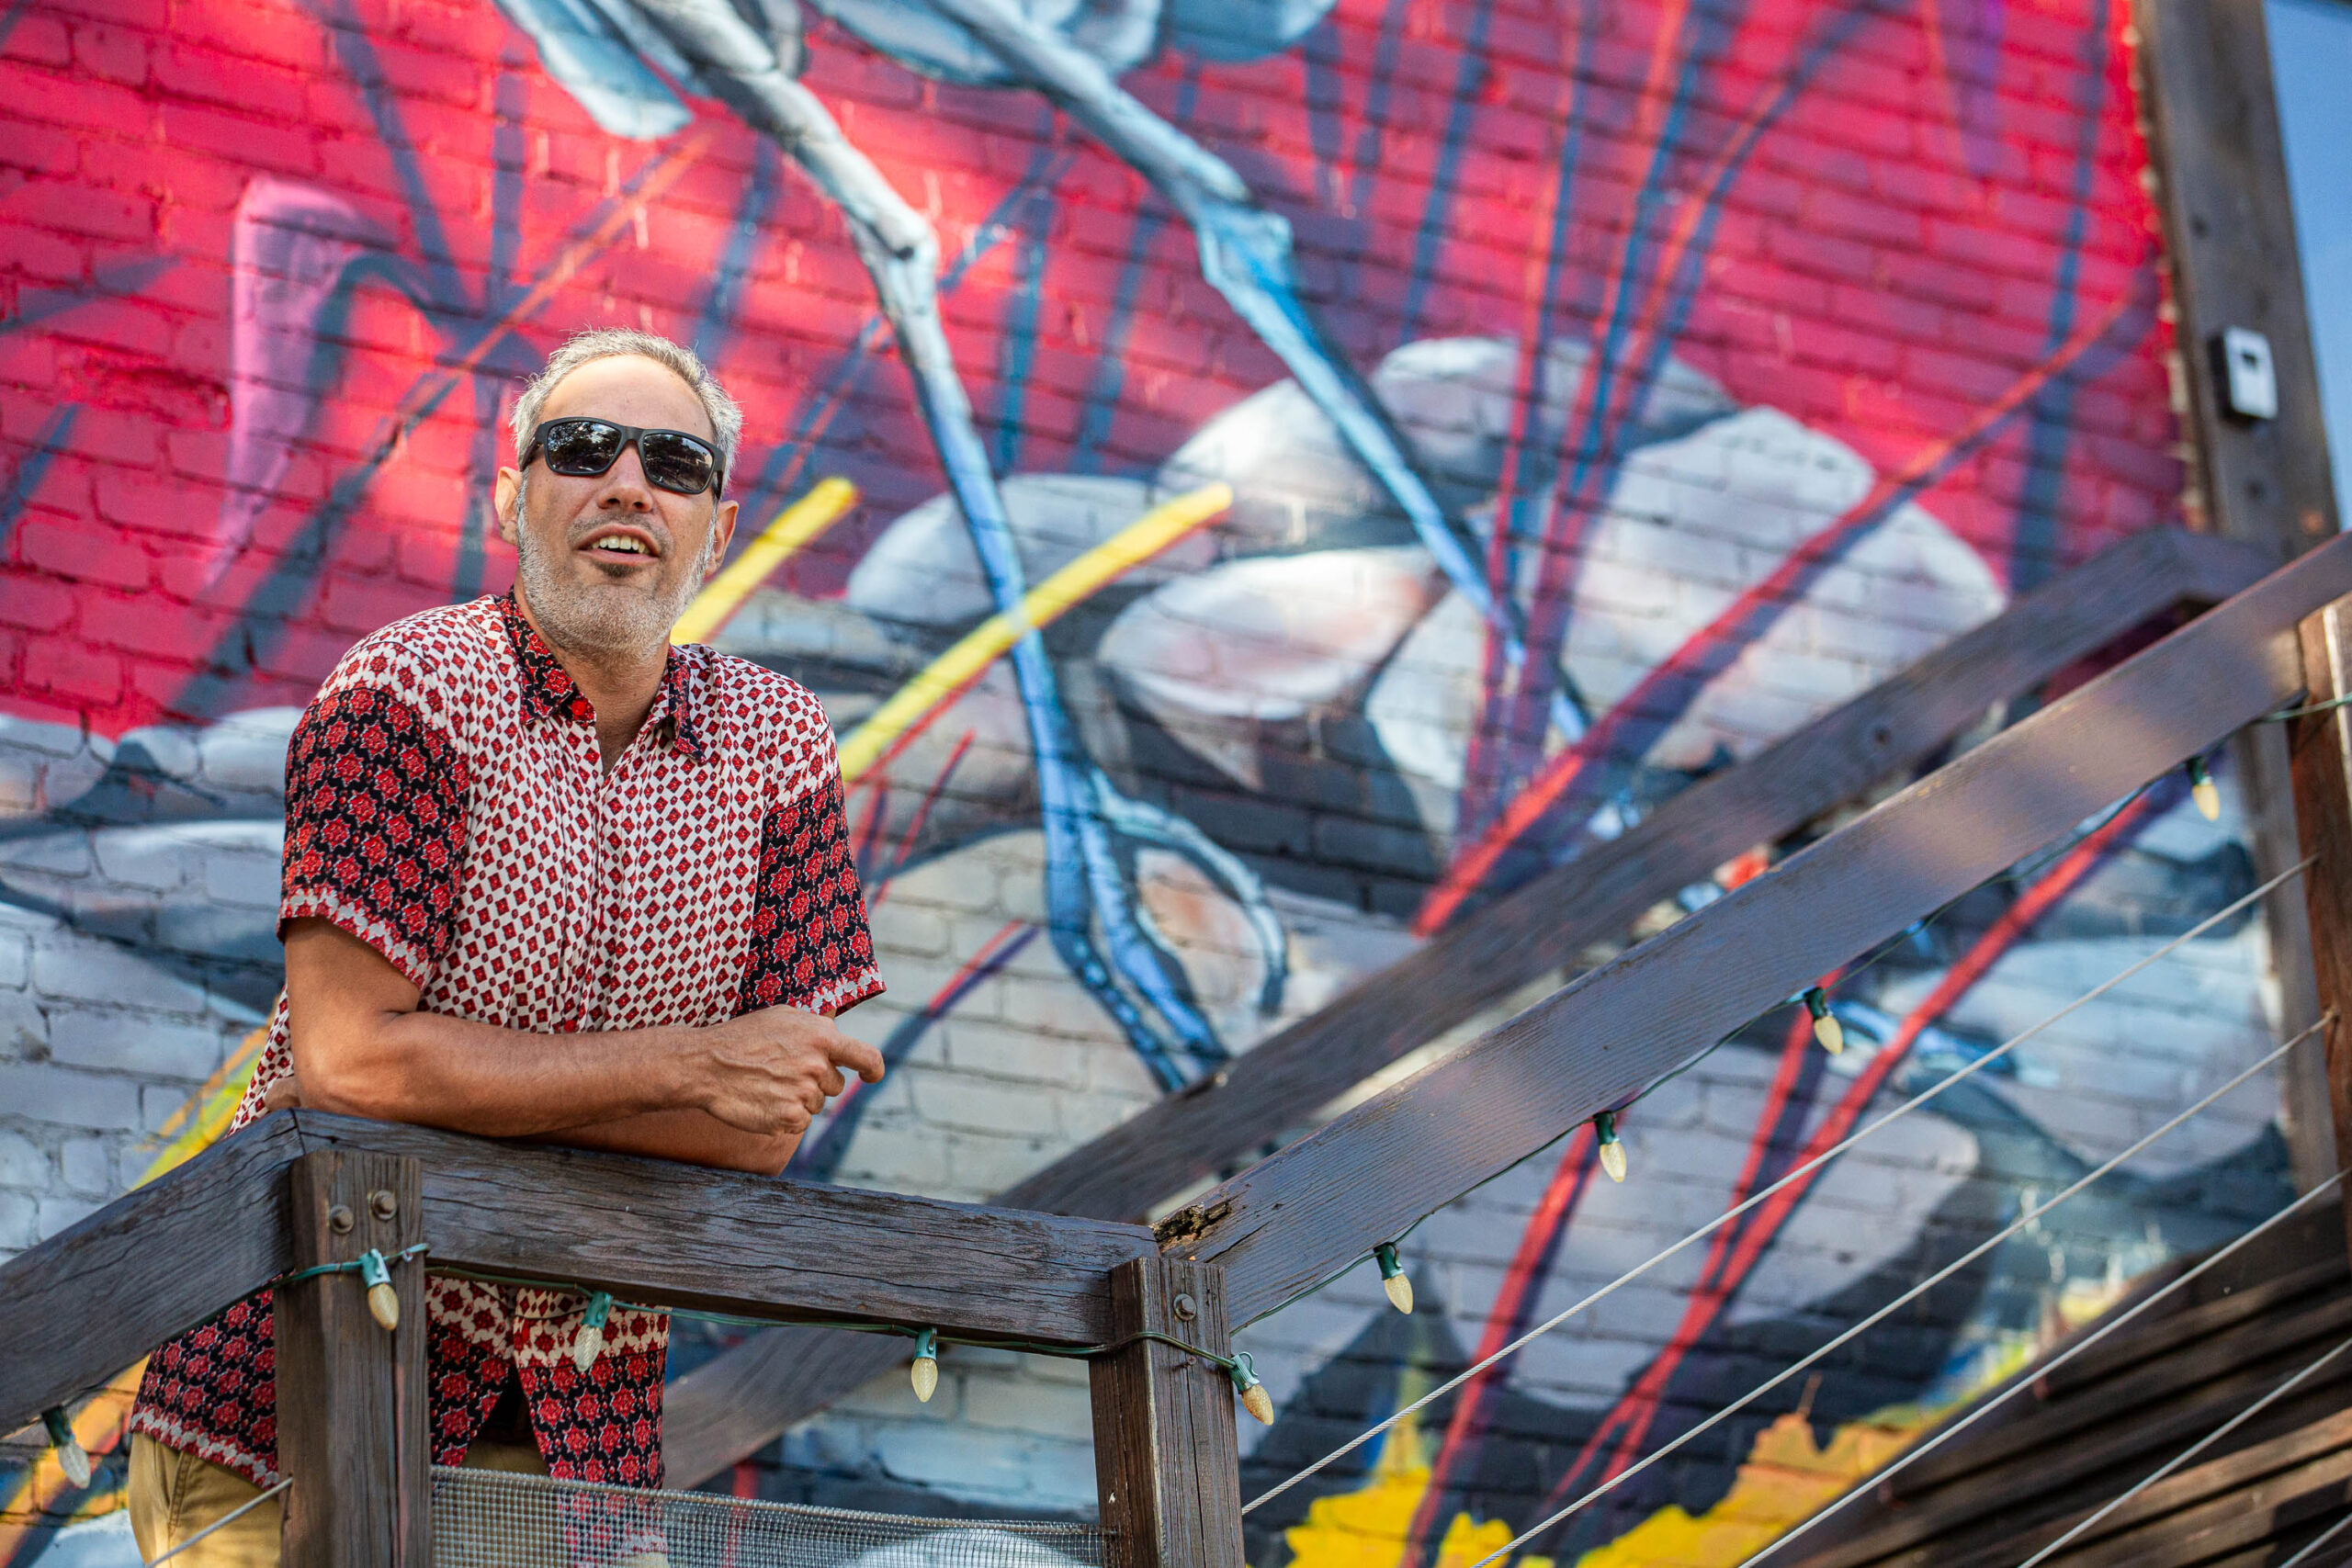 A man in sunglasses standing next to a mural.